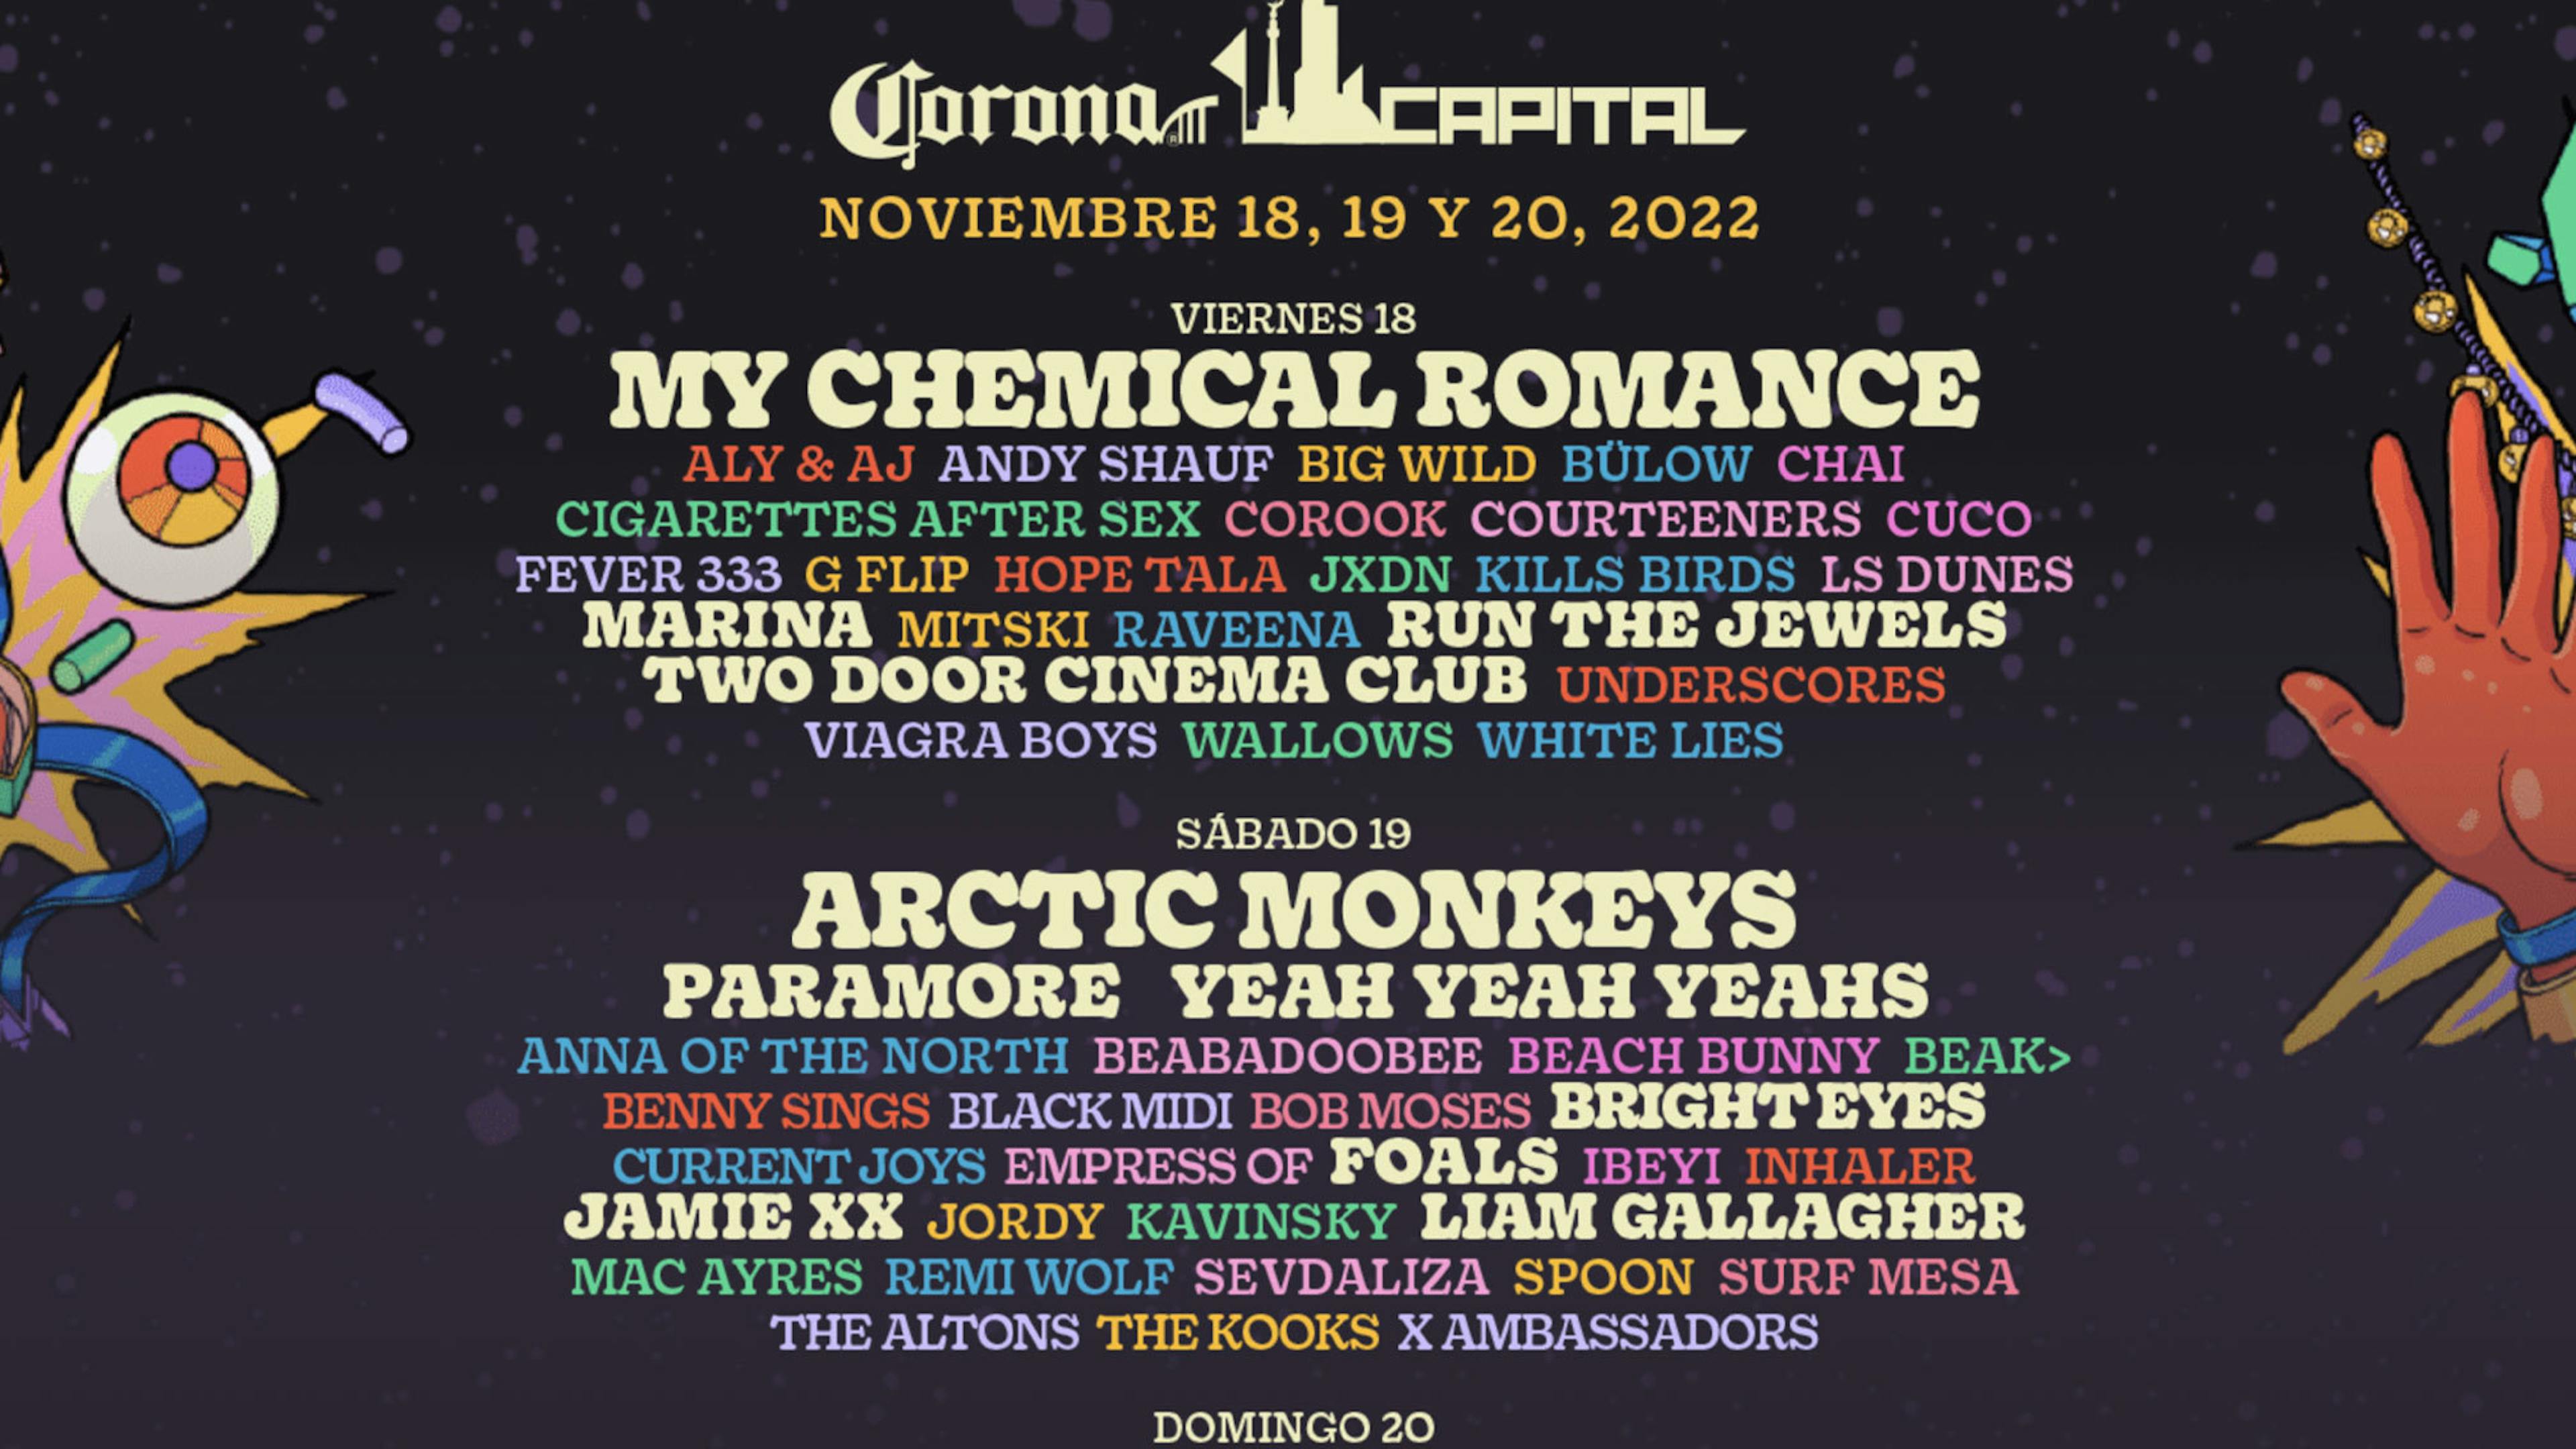 My Chemical Romance, Paramore and more for Mexico’s Corona Capital festival